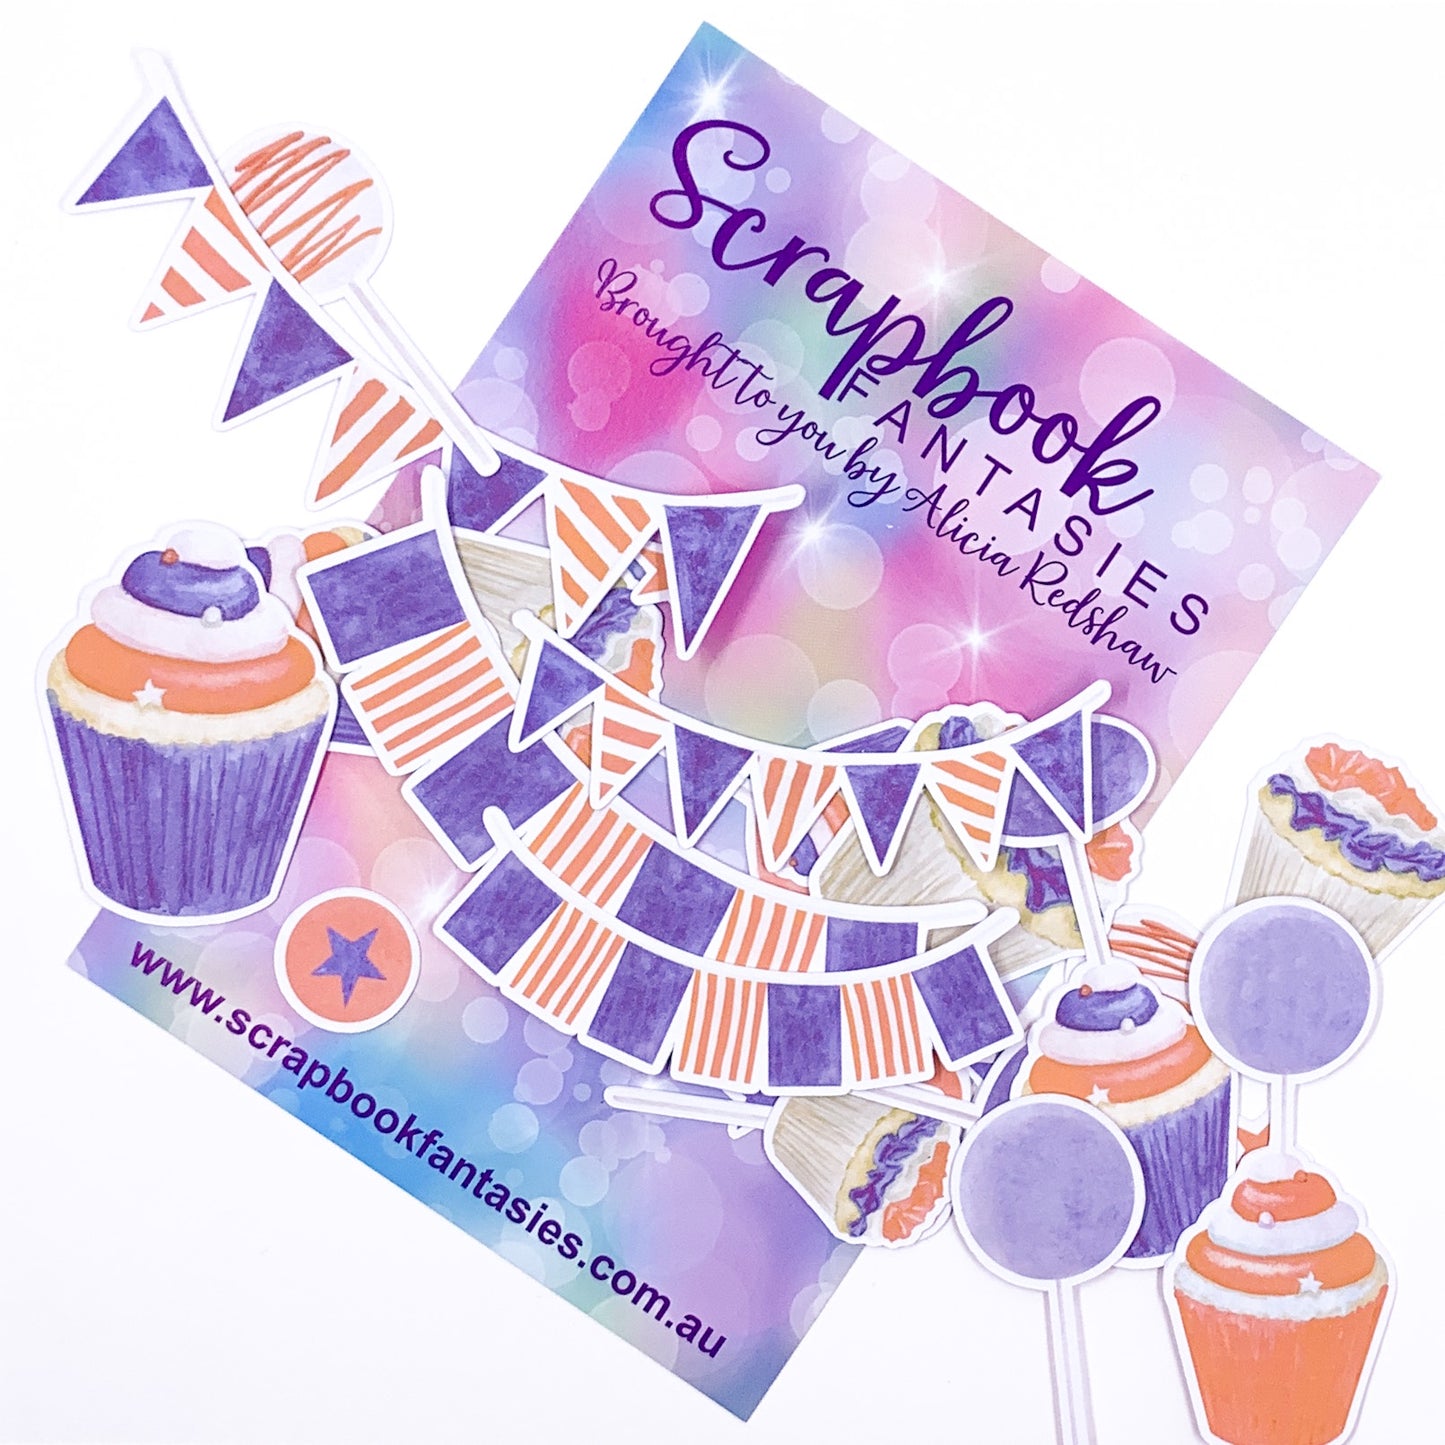 Colour-Cuts - Cupcakes & Banners 9 (26 pieces) Designed by Alicia Redshaw